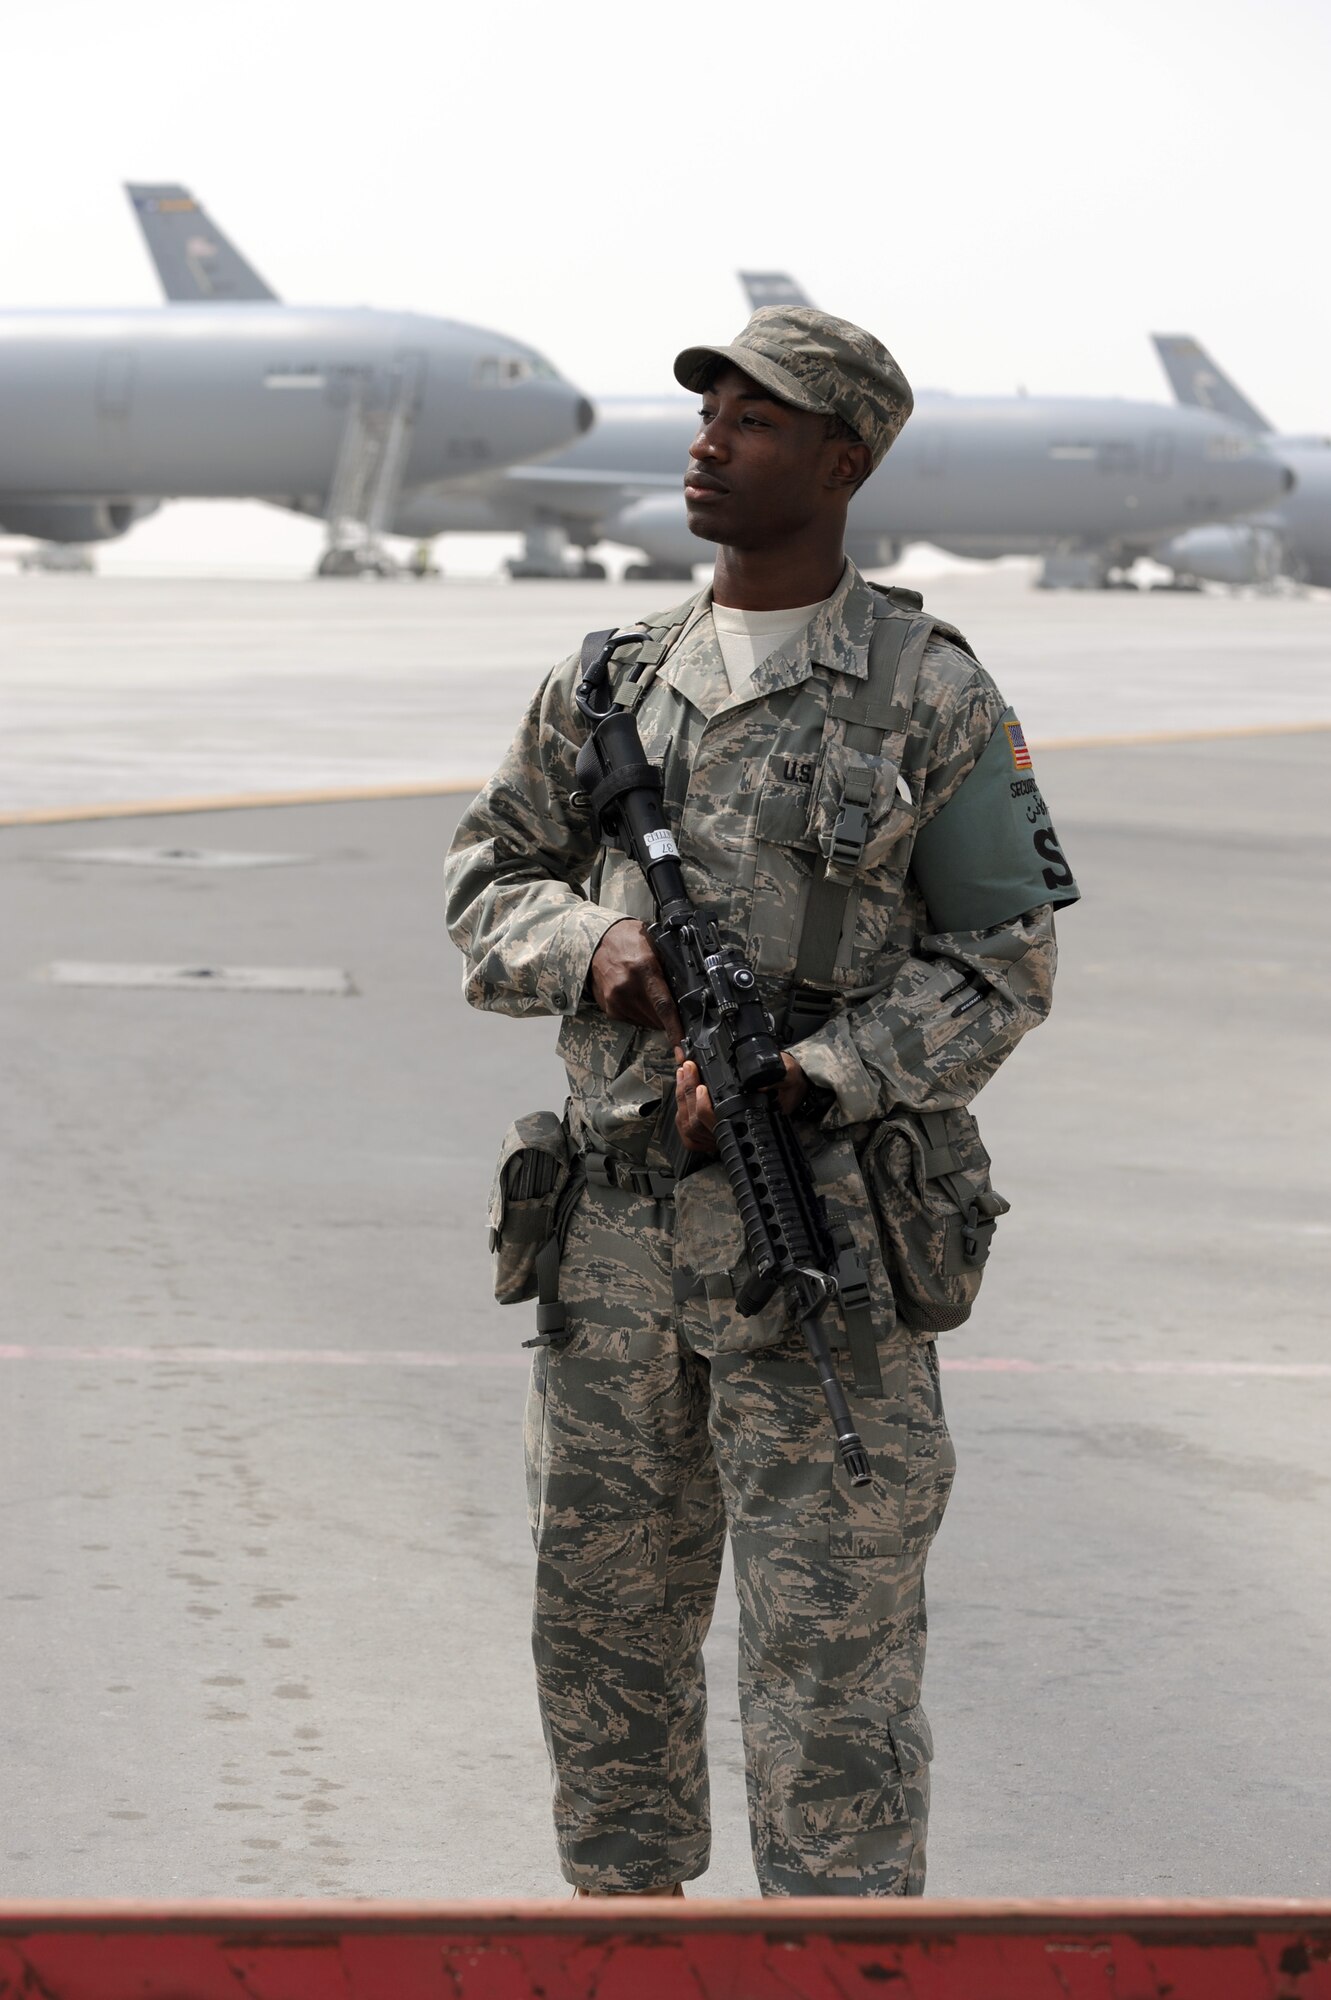 Senior Airman Michael Better, security forces journeyman with the 380th Expeditionary Security Forces Squadron, watches over a checkpoint near the flightline at a non-disclosed base in Southwest Asia on March 27, 2010. As a security forces Airman, Airman Better supports all security and force protection efforts for a deployed wing of more than 1,900 people and for billions of dollars worth of Air Force equipment and assets. He is deployed from the 628th Security Forces Squadron at Joint Base Charleston, S.C., and his hometown is Baltimore City, Md. (U.S. Air Force Photo/Master Sgt. Scott T. Sturkol/Released) 